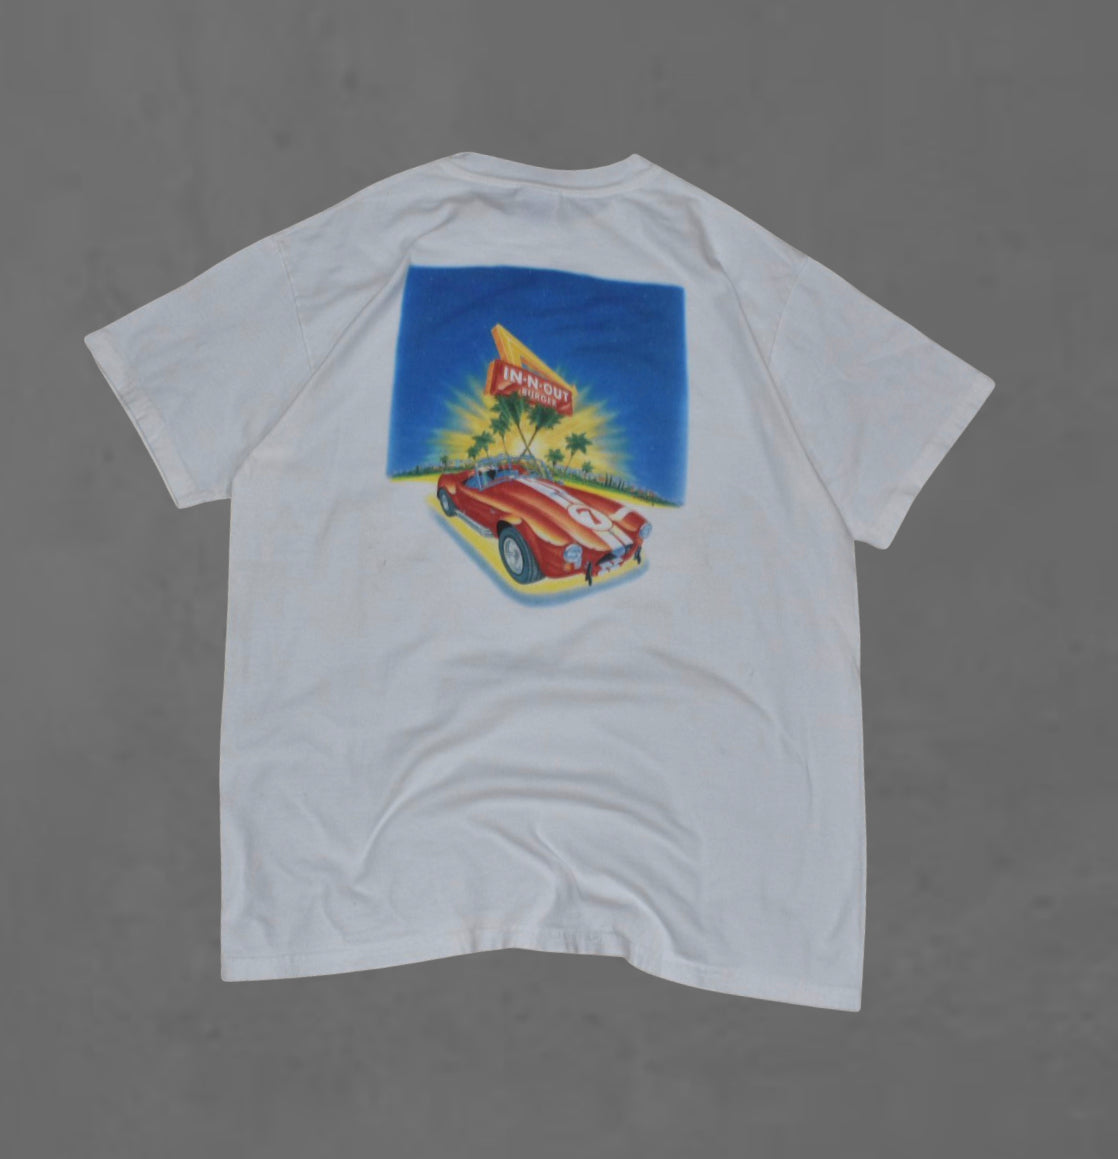 In-N-Out Burger California Tee (L)